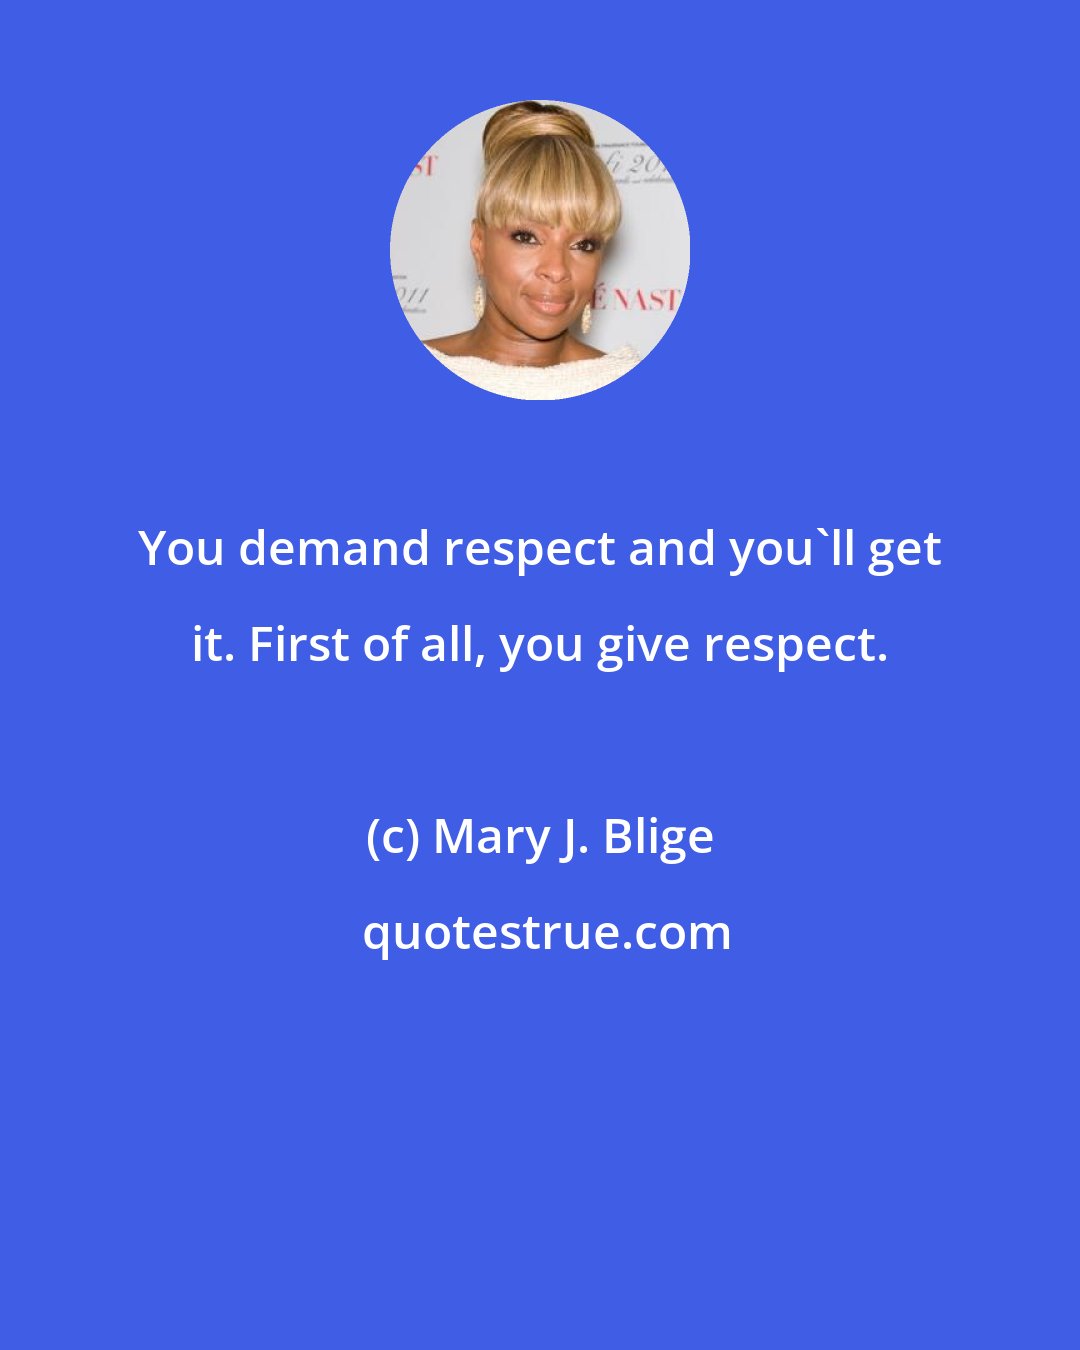 Mary J. Blige: You demand respect and you'll get it. First of all, you give respect.